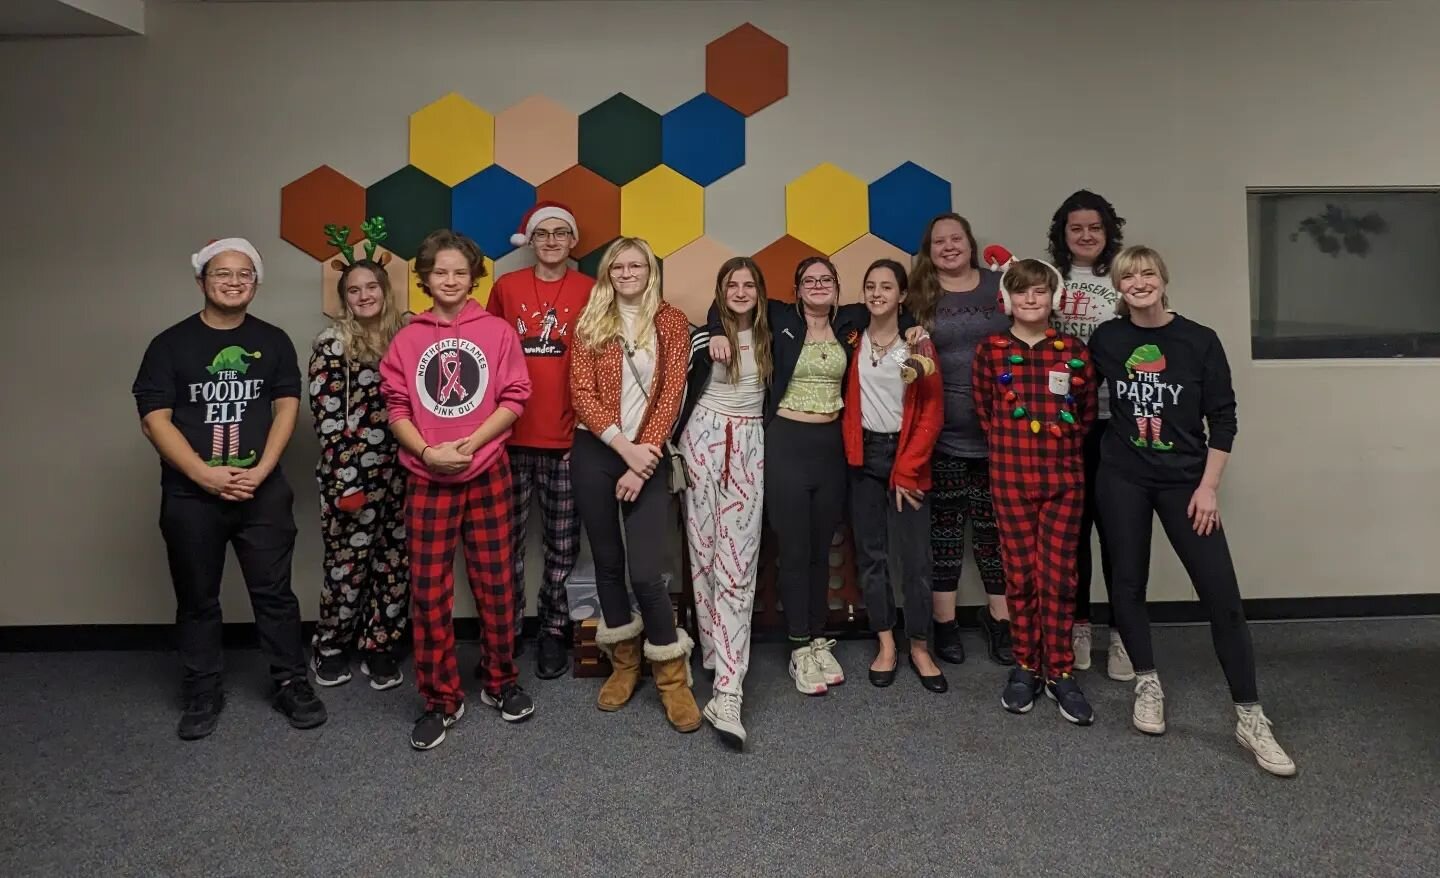 Tonight twelve Impulse students and leaders used their time, energy, and gifts to throw an AWESOME Christmas party for our kids ministry and so parents could participate in Parent Night. Thank you to these amazing people who gave up a Friday Night to